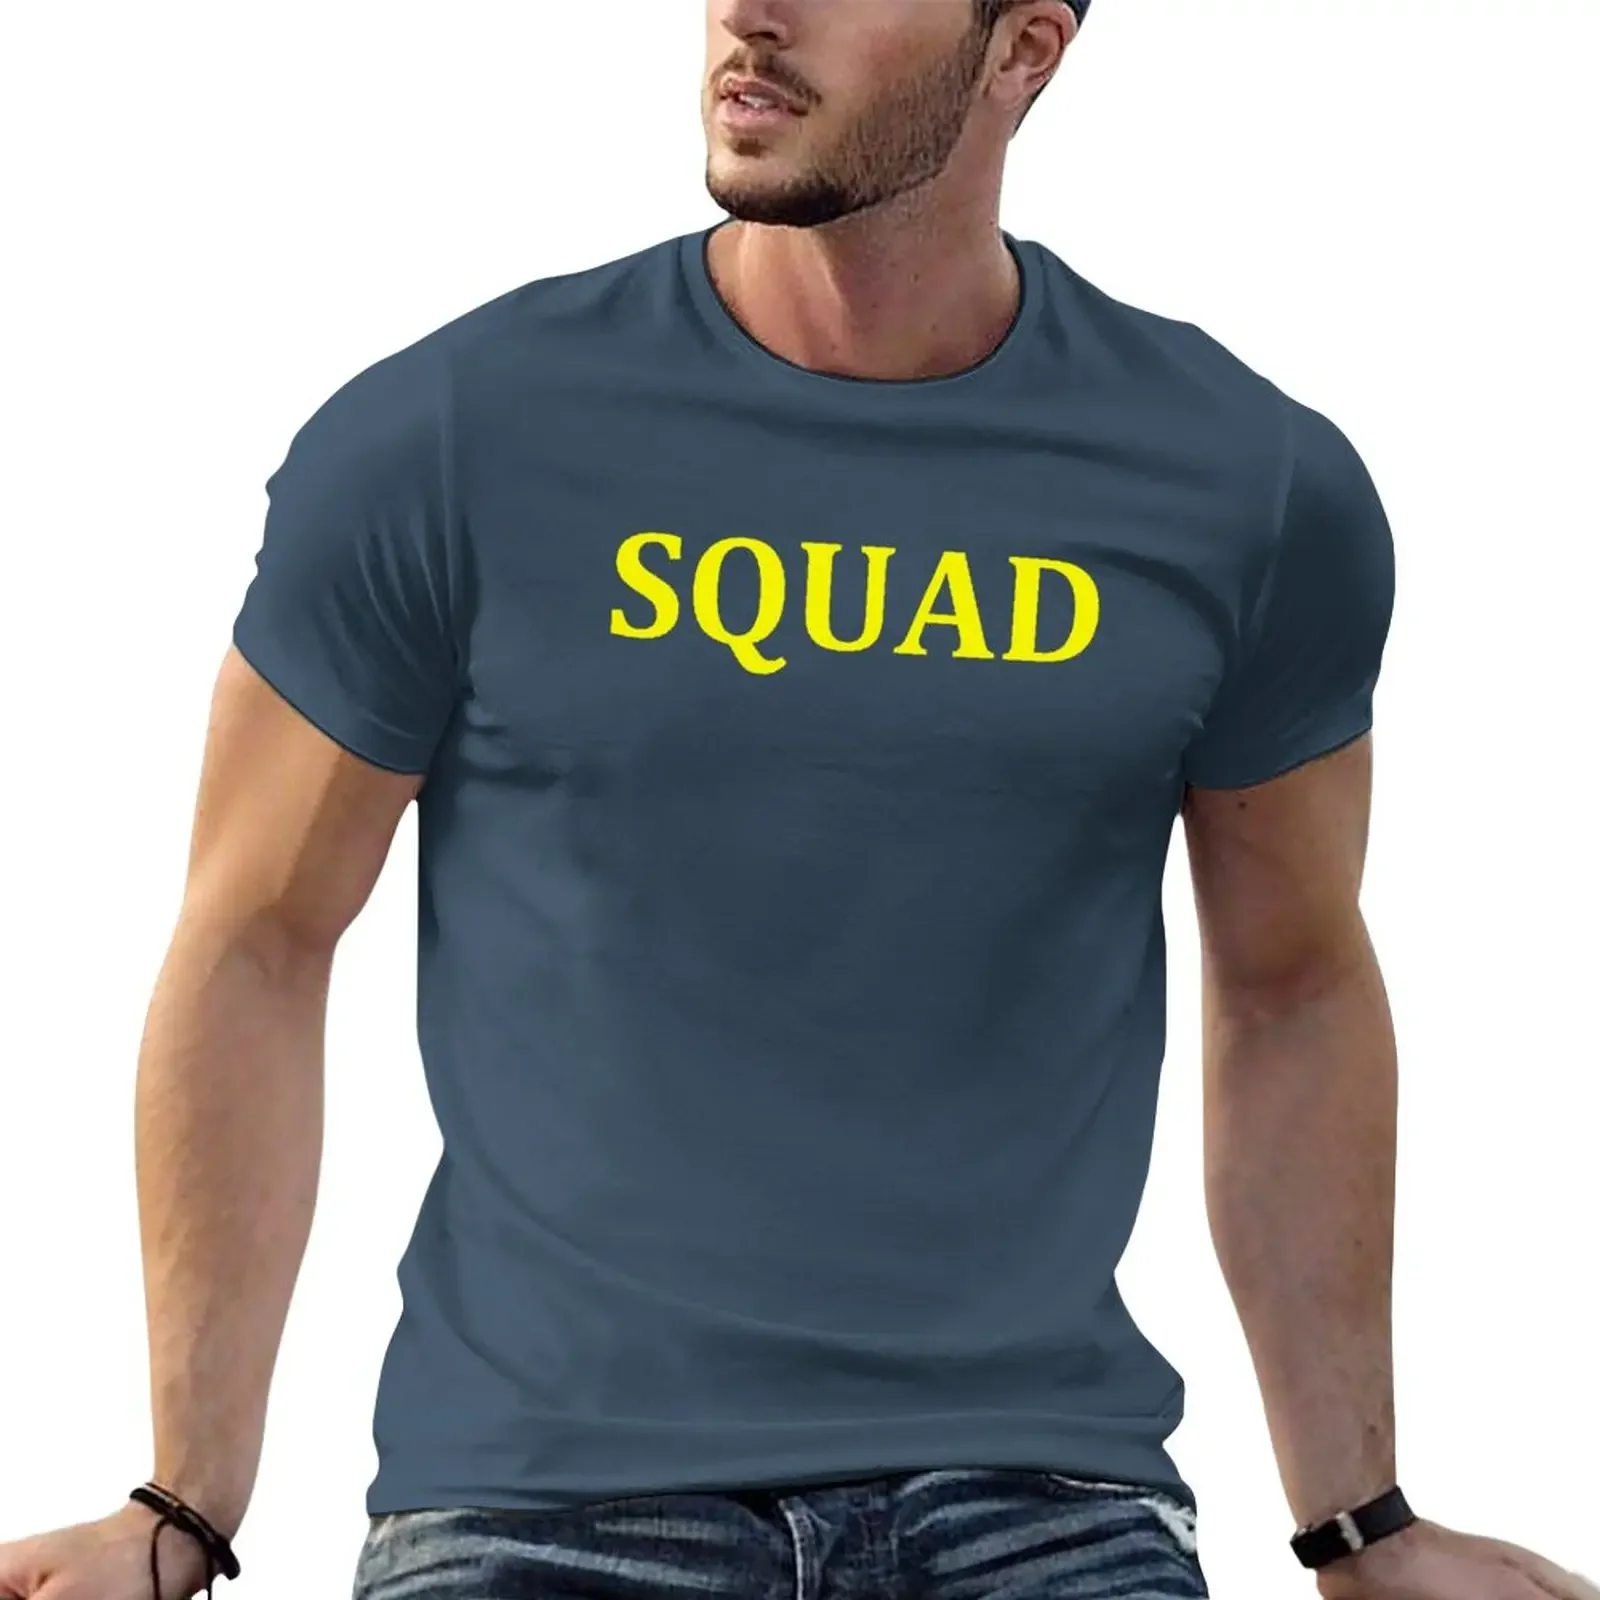 

Squad T-Shirt oversizeds oversized Aesthetic clothing mens big and tall t shirts